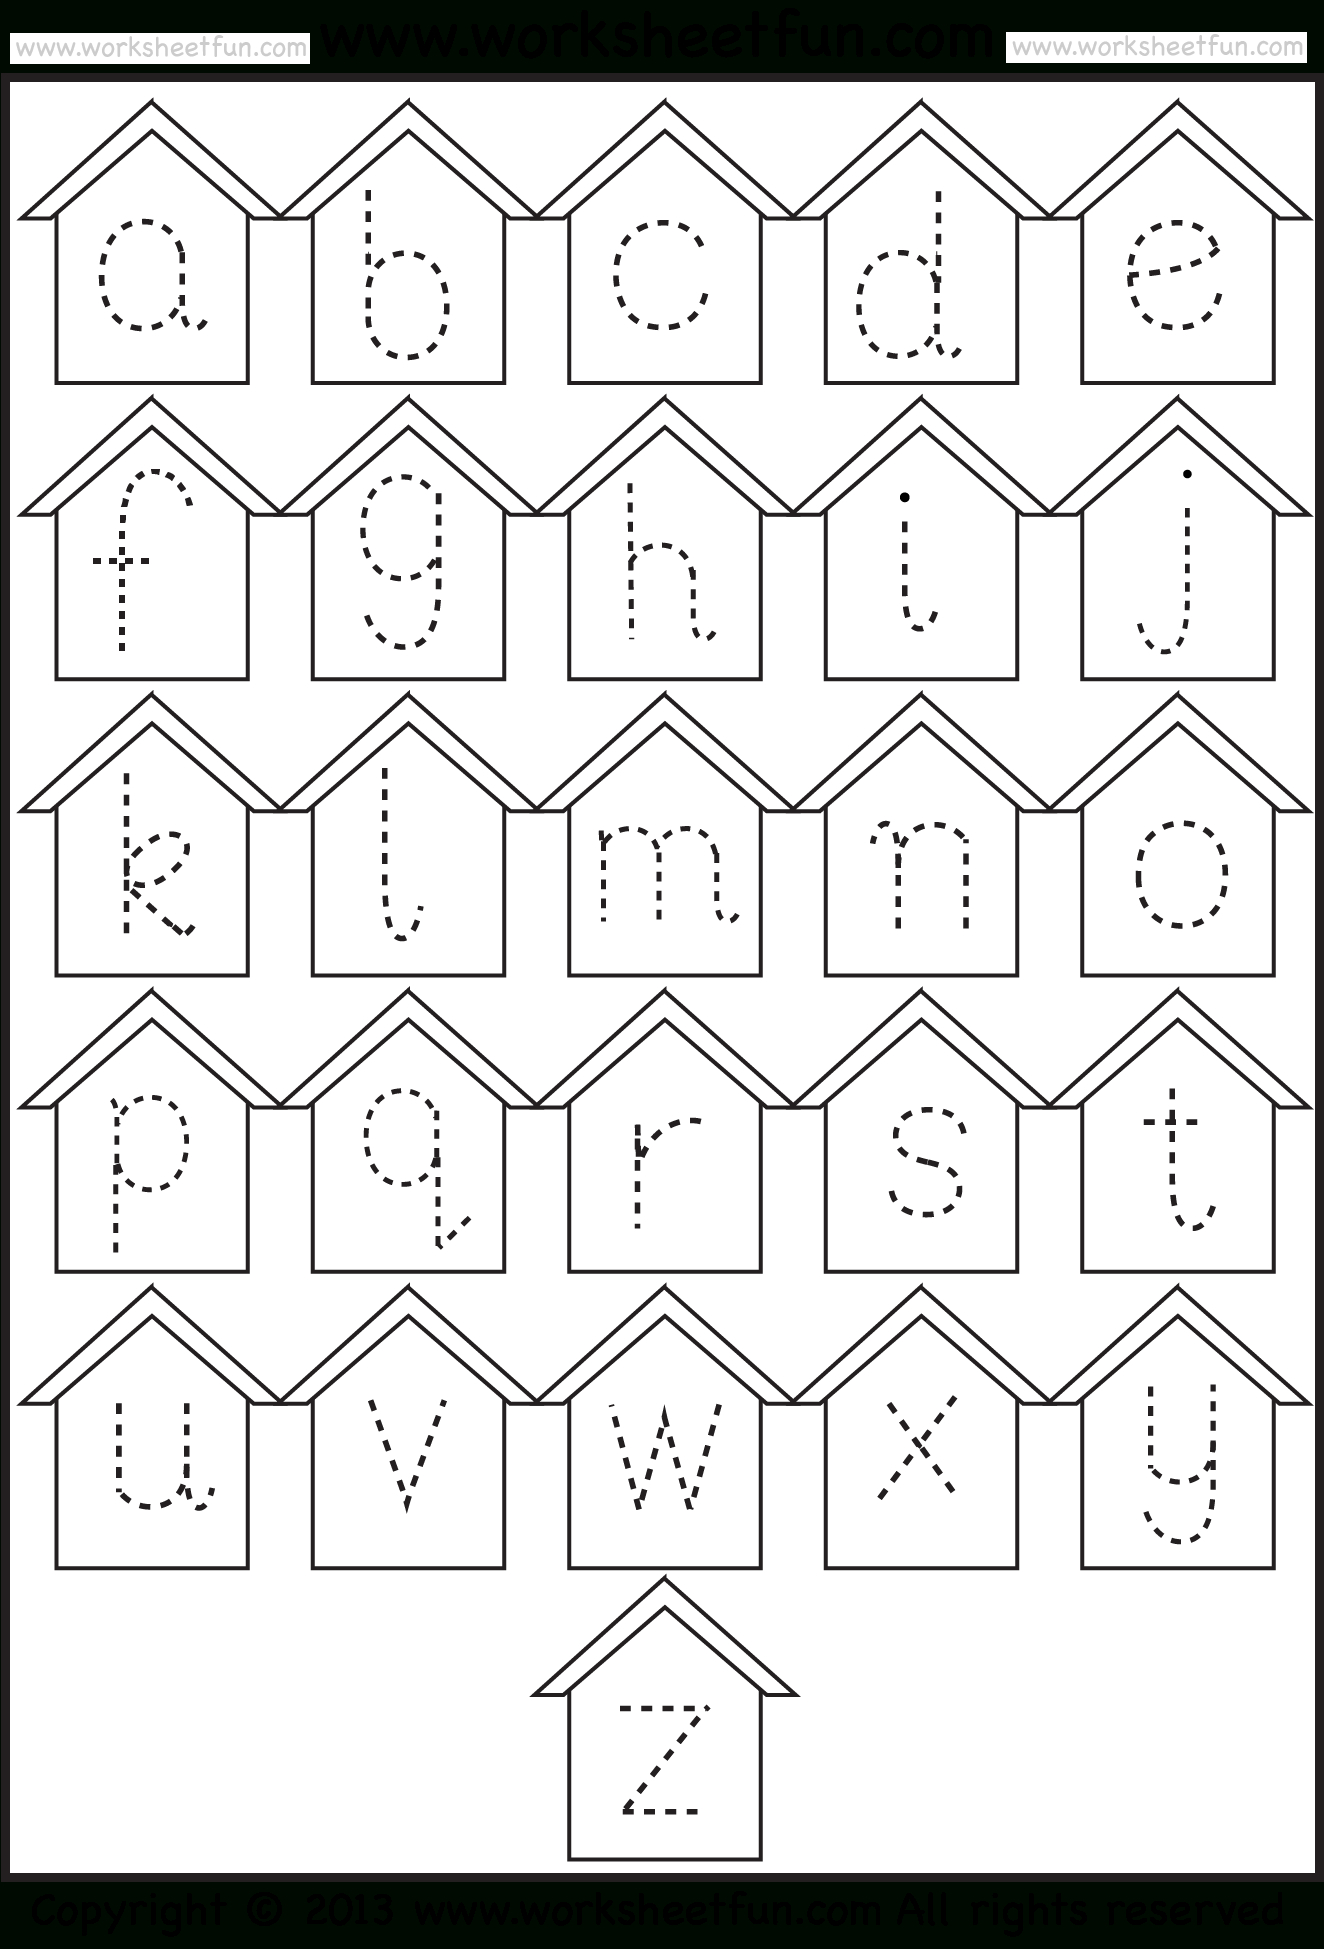 Alphabet Tracing Worksheet A Z | Printable Worksheets And for Tracing Small Letter A Worksheet